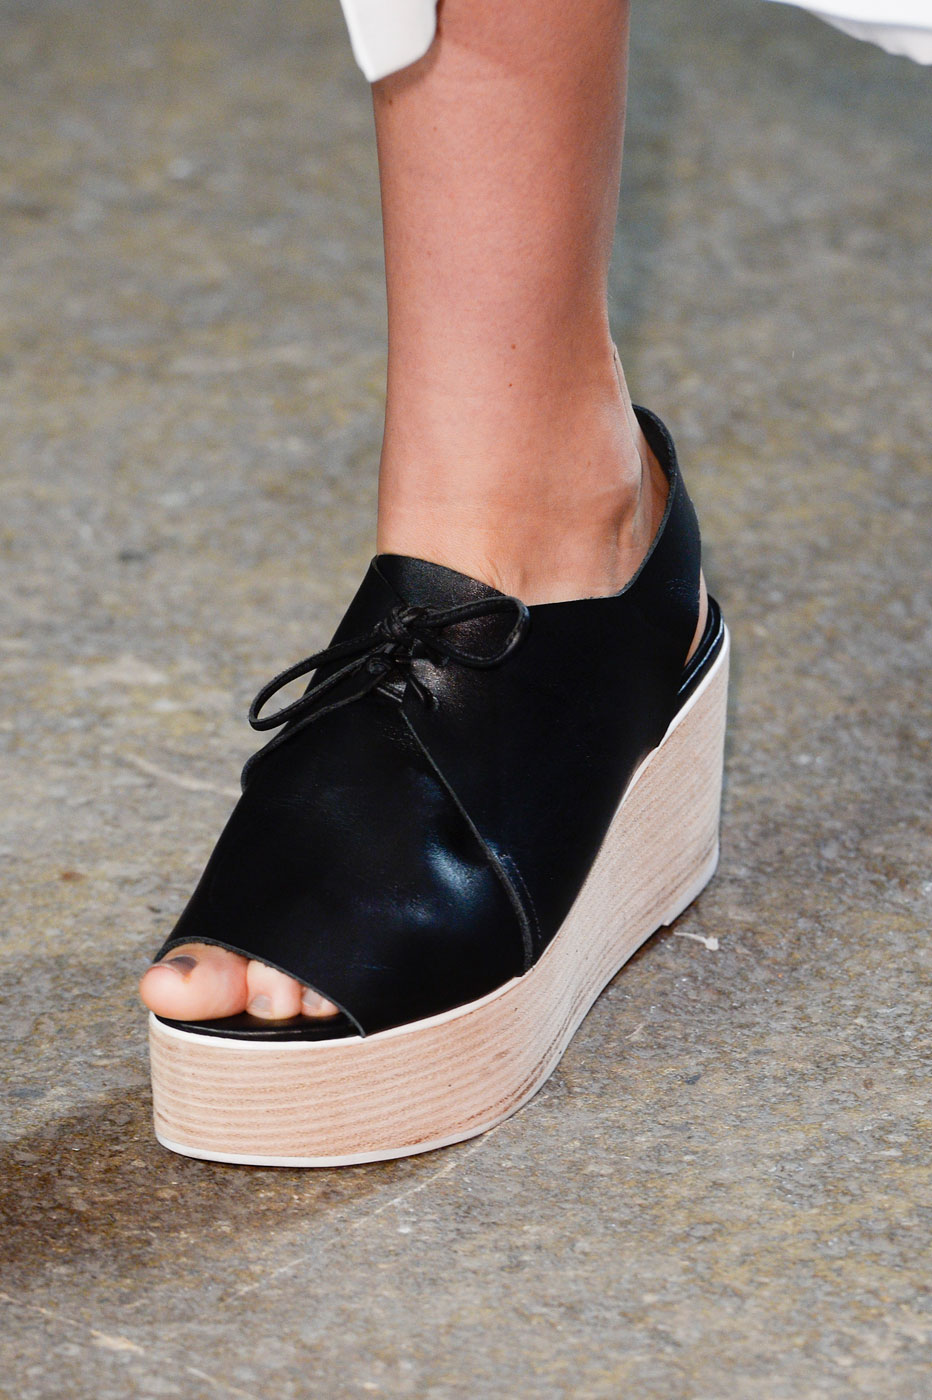 Tibi Spring 2015 | The Best Shoes, Bags, and Baubles on the 2015 ...